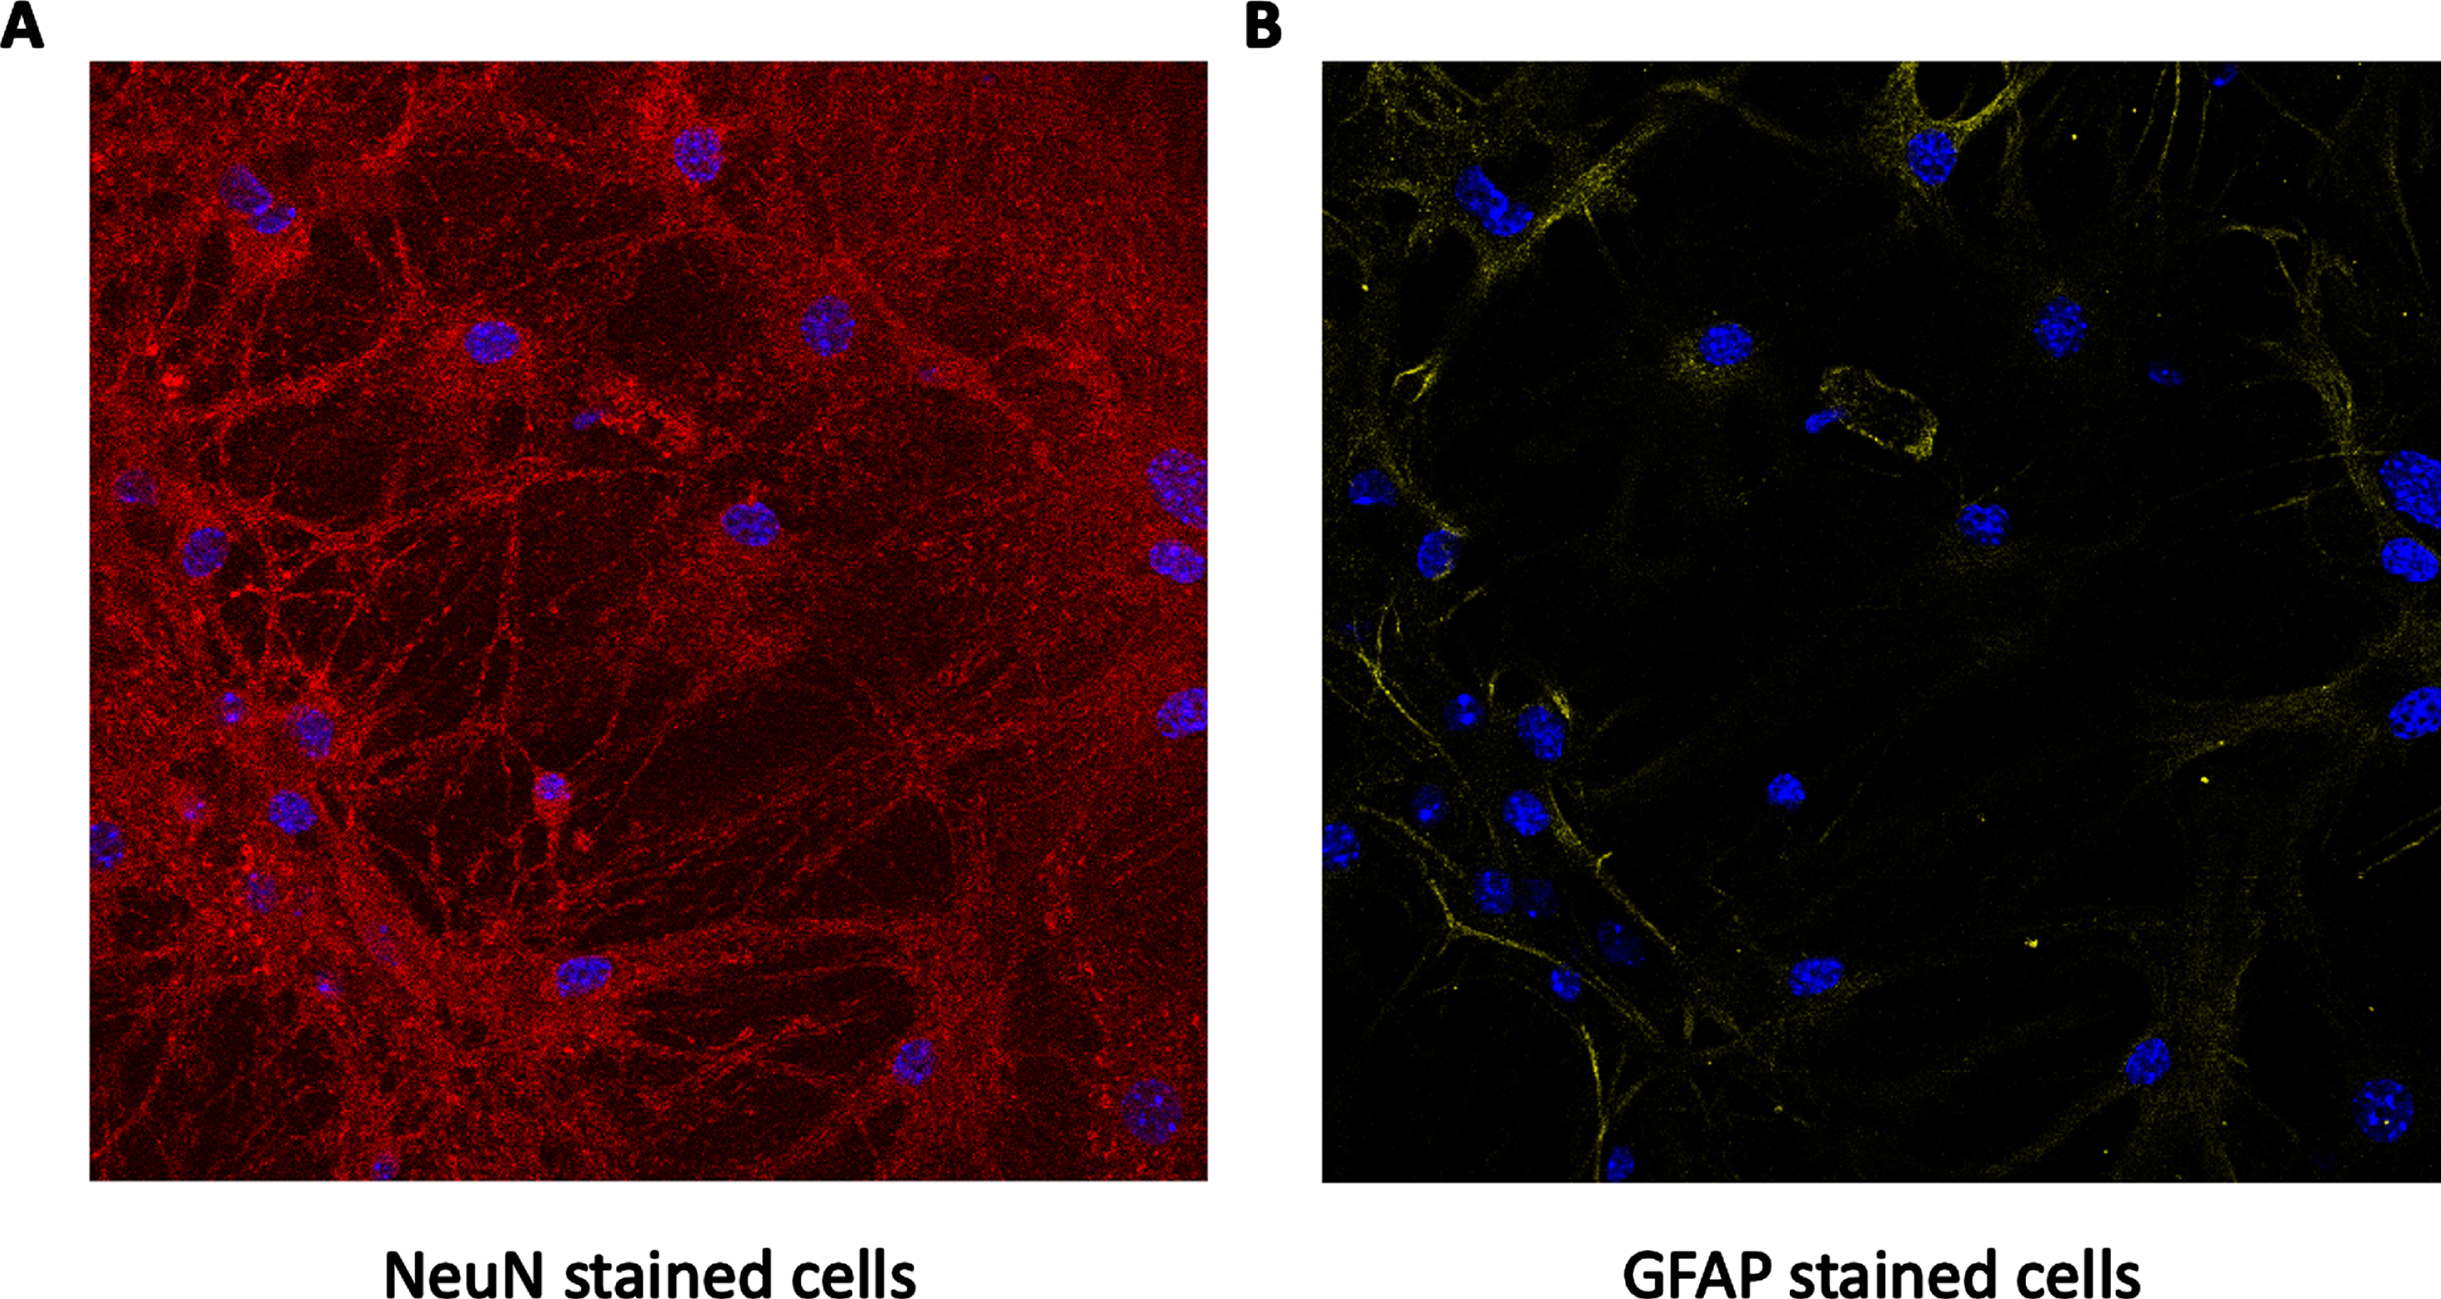 Neurons/astrocytes ratio in primary cultures. Primary cultures were stained for both NeuN (marked in red in A) and GFAP (marked in yellow in B). DAPI staining for cells’ nucleus is marked in blue. As can be seen, the levels of NeuN were much higher than those of GFAP, and together with the DAPI staining indicate that the culture is mostly neuronal, as expected.